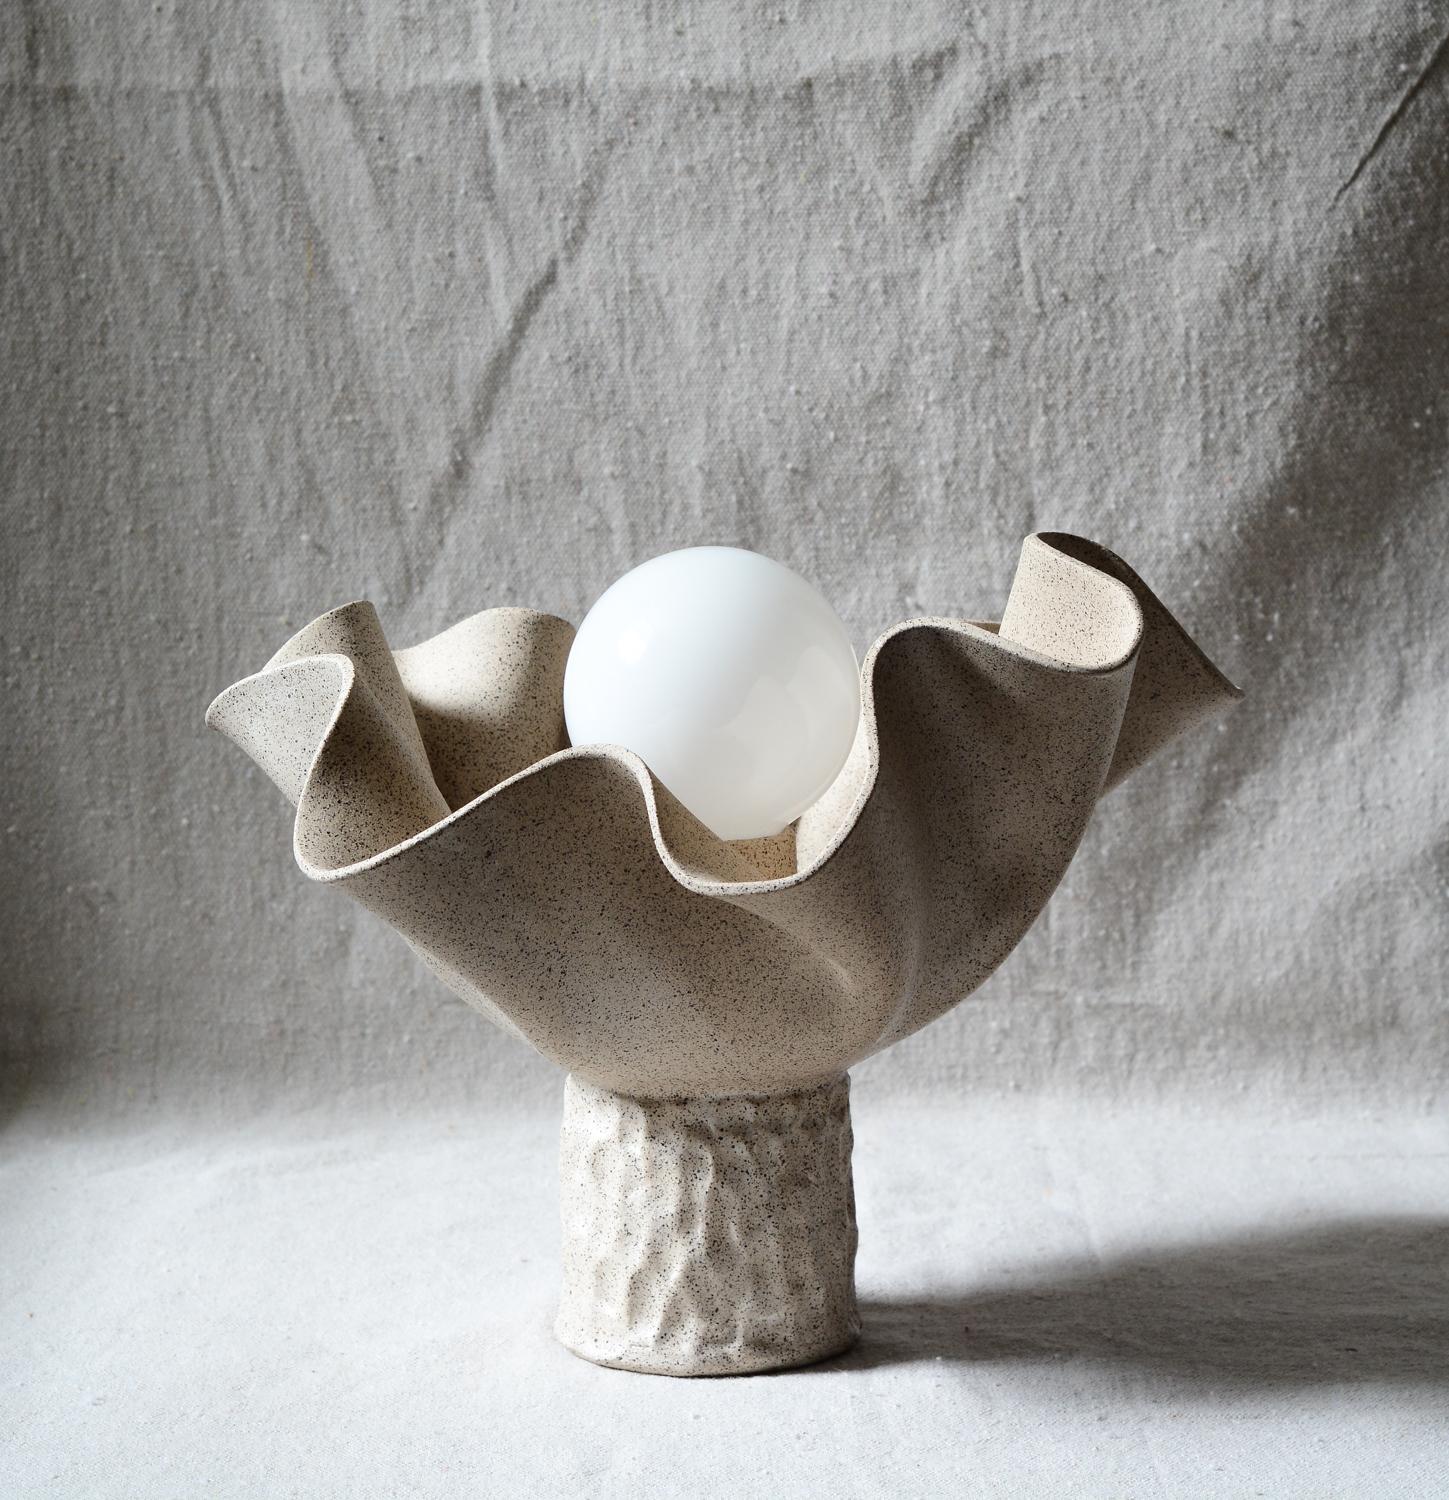 Handbuilt folded stoneware clay table lamp inspired by nature's undulations and fabric evokes a sense of organic beauty and tactile elegance. 
The lamp embraces the organic, fluid shapes found in nature, with undulating curves and folds reminiscent